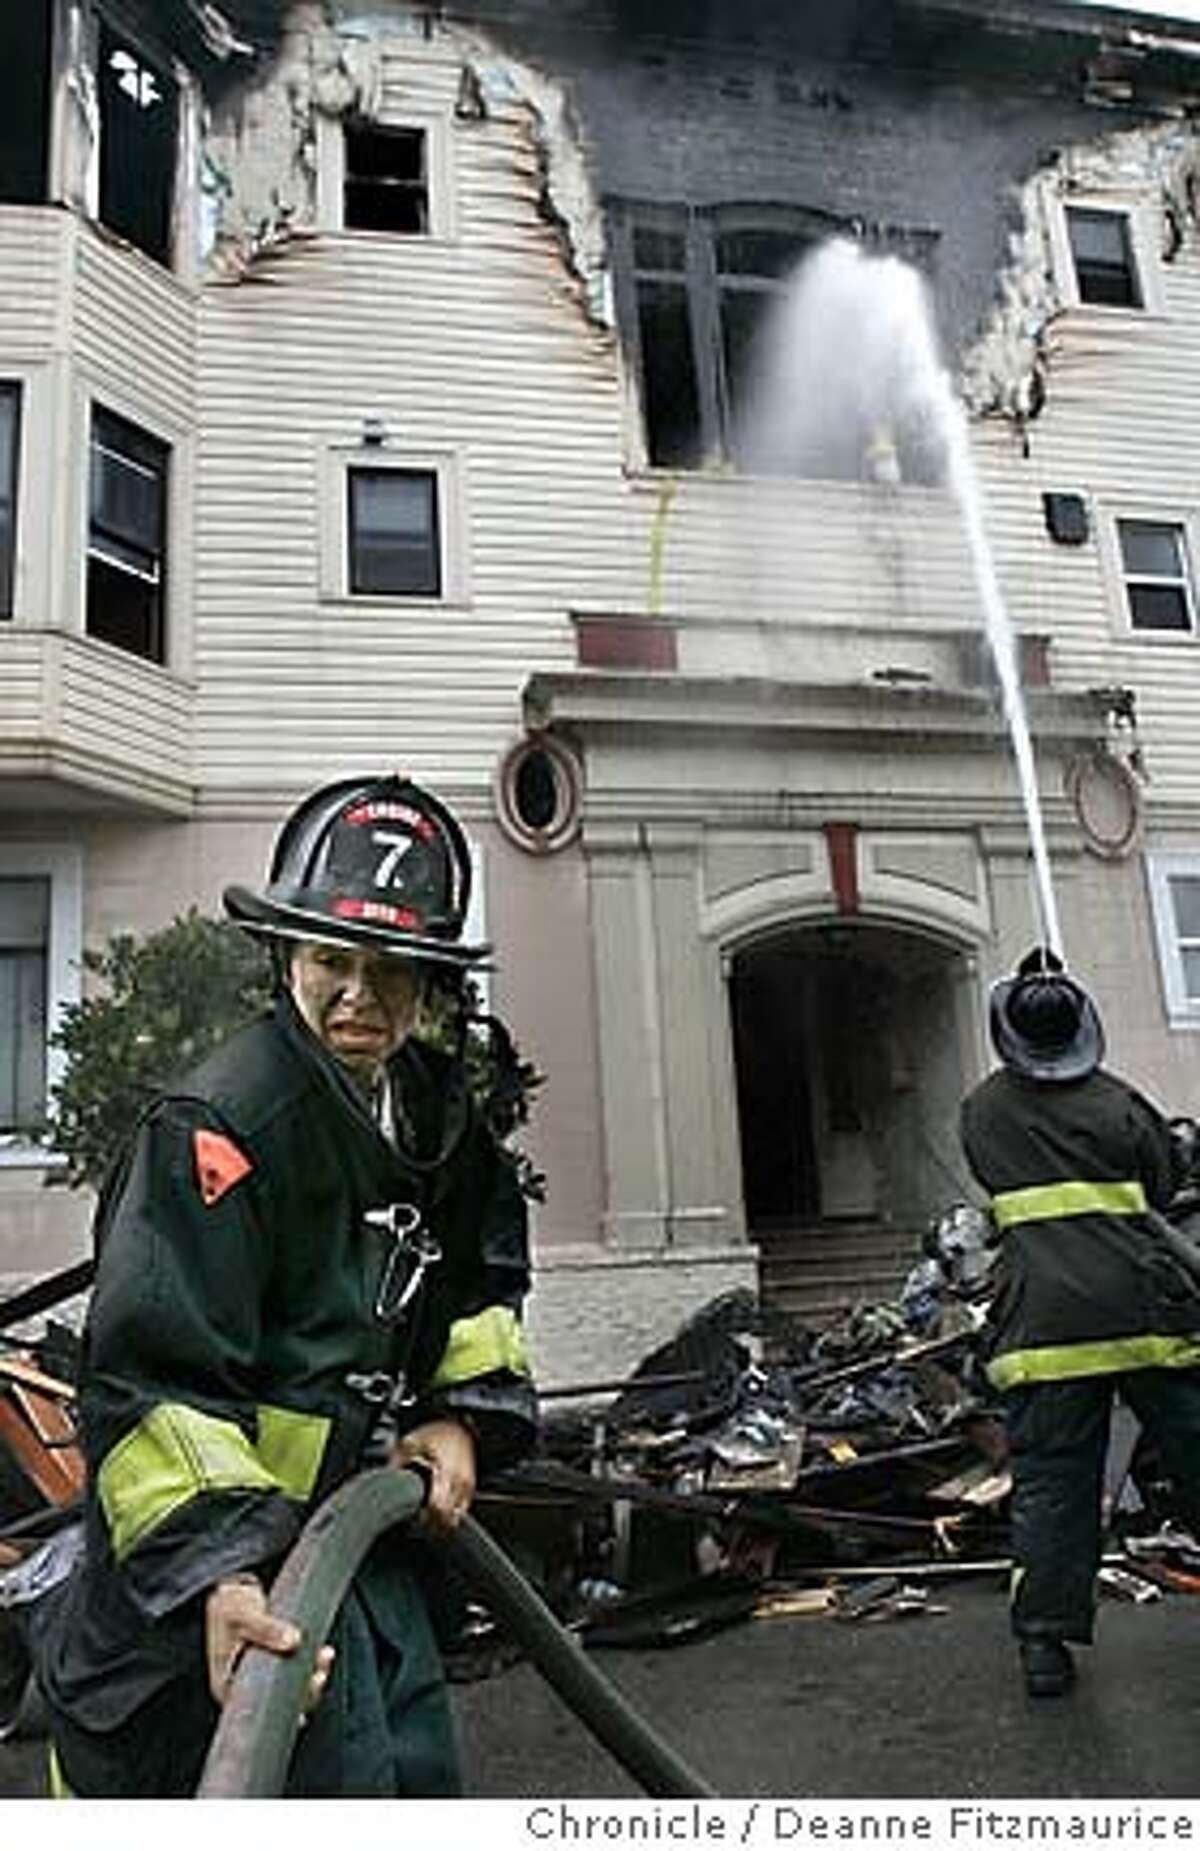 Firefighter Sadie Magaly helps with the hose. Firefighters are on the scene after an early morning fire on Capp Street in the Mission District. Deanne Fitzmaurice / San Francisco Chronicle